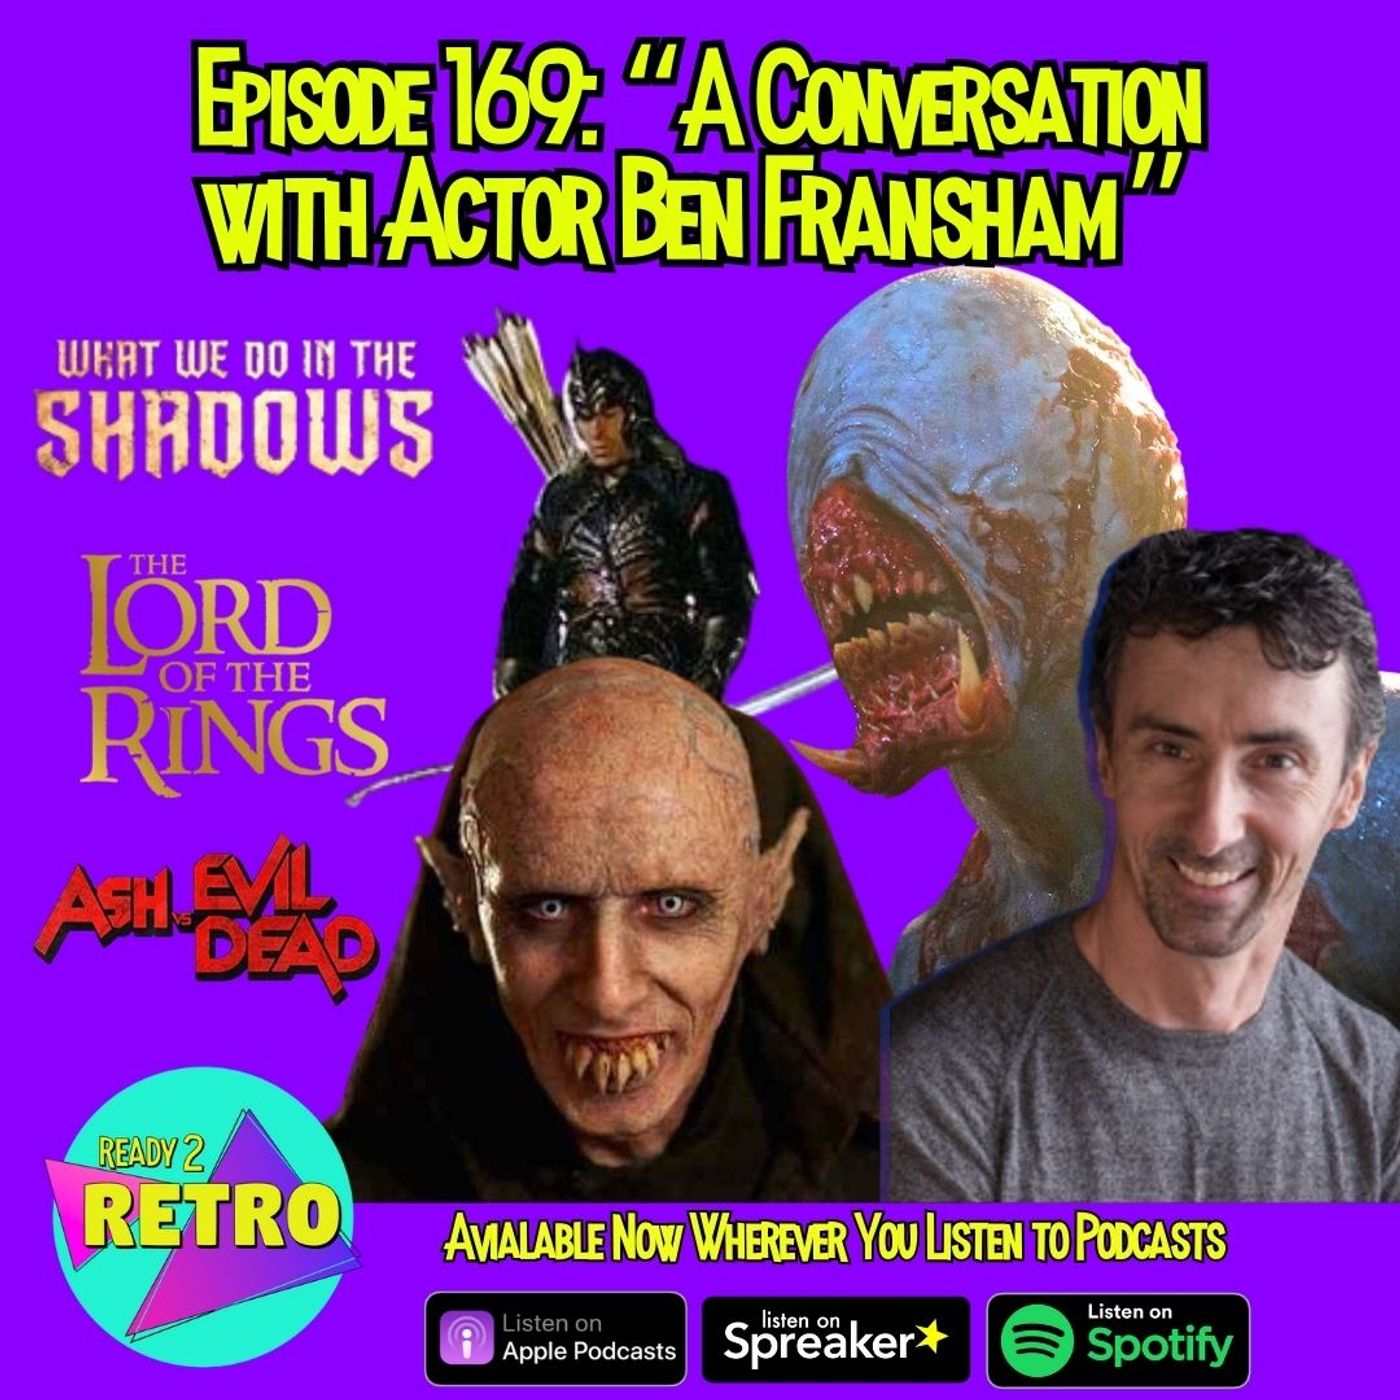 Episode 169: ”A Conversation with Actor Ben Fransham” (What We Do in the Shadows 2014)